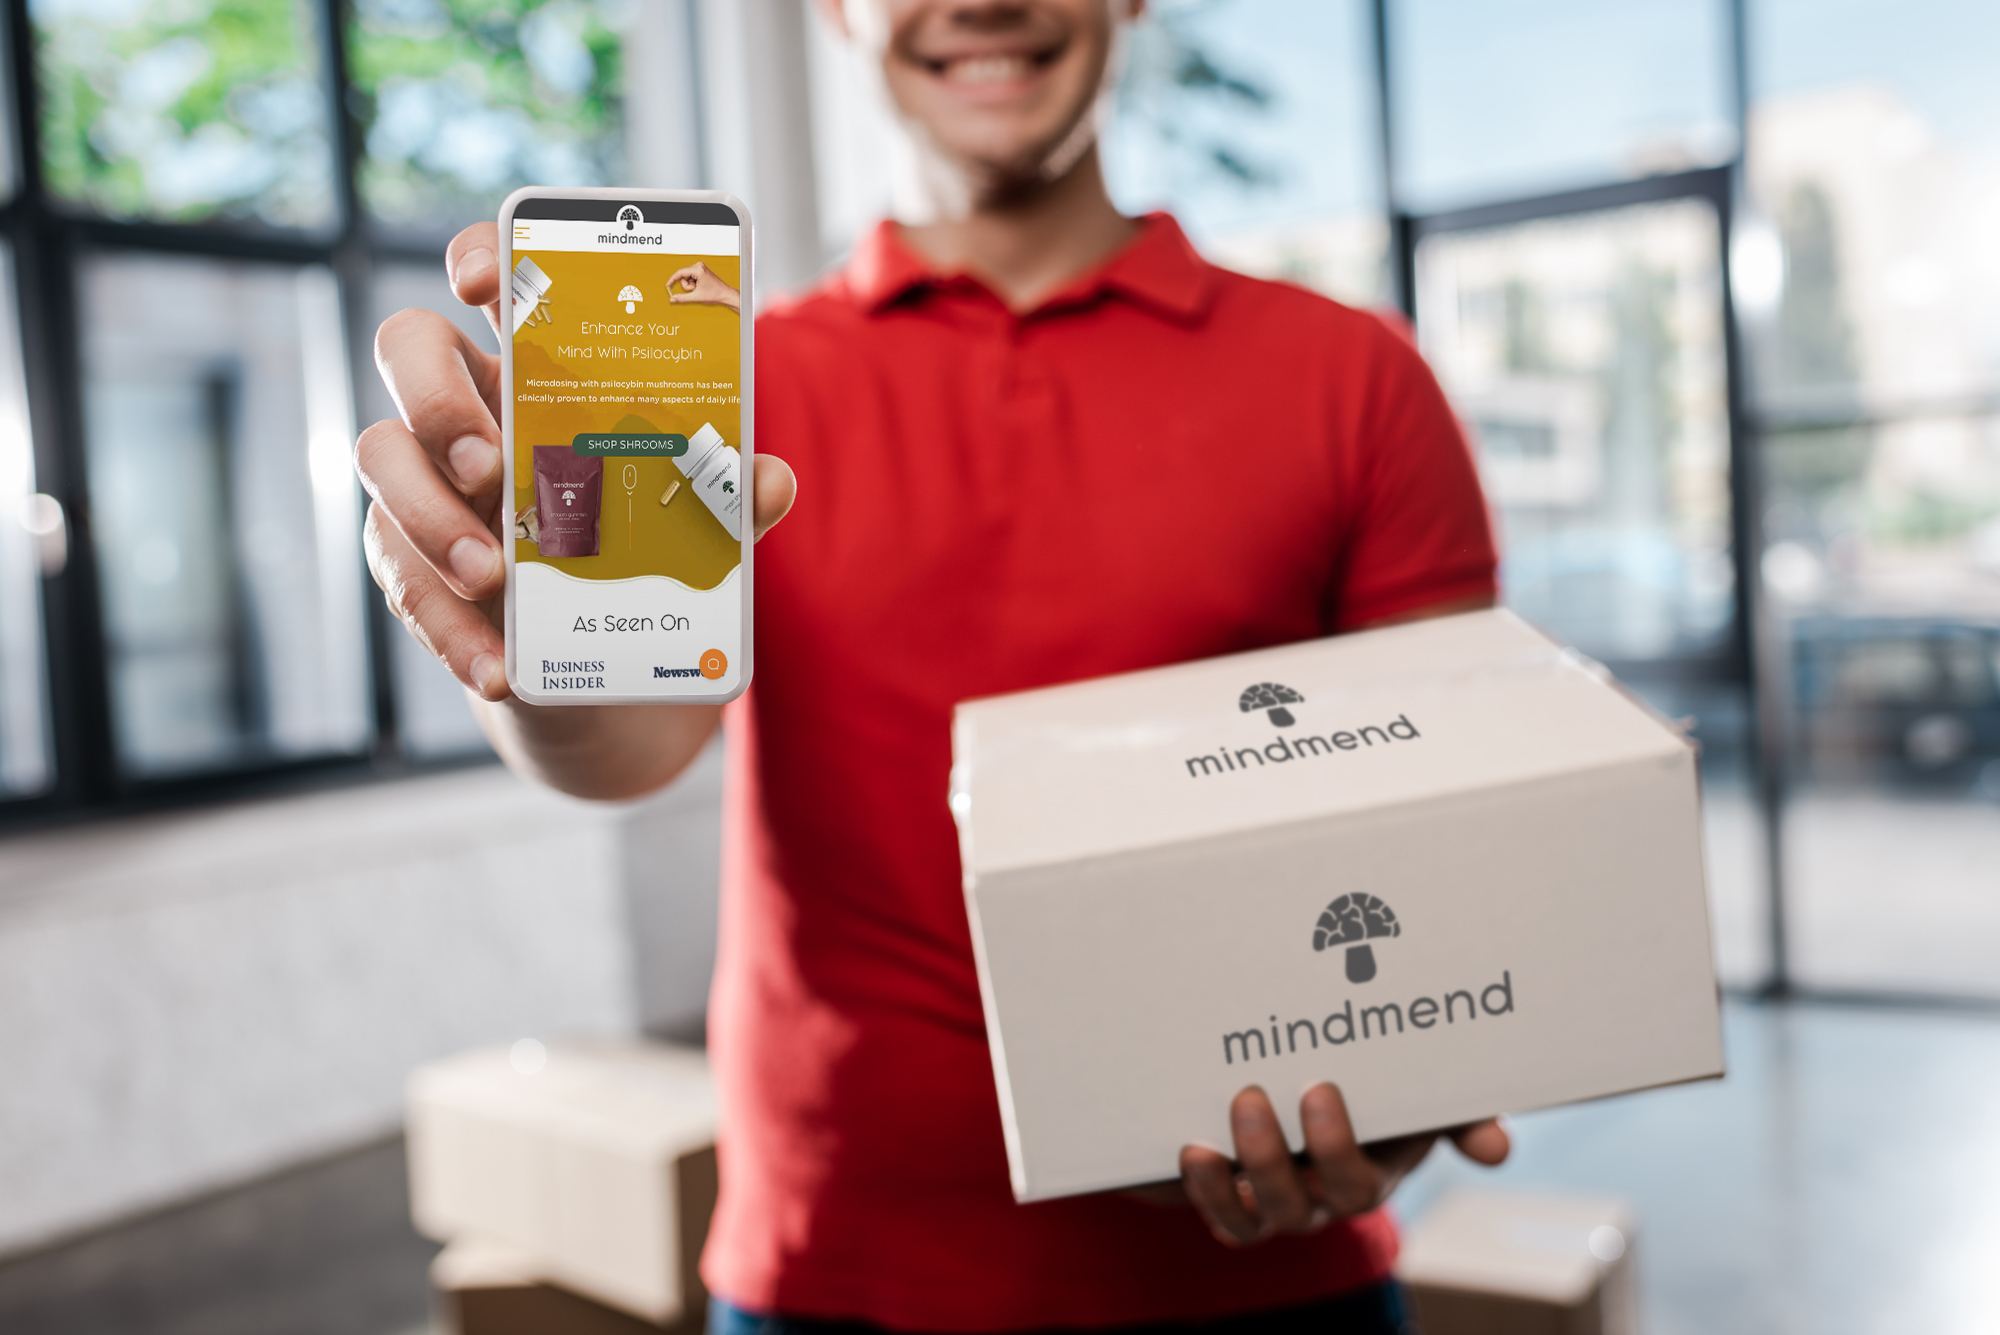 man smiling holding a phone and a box